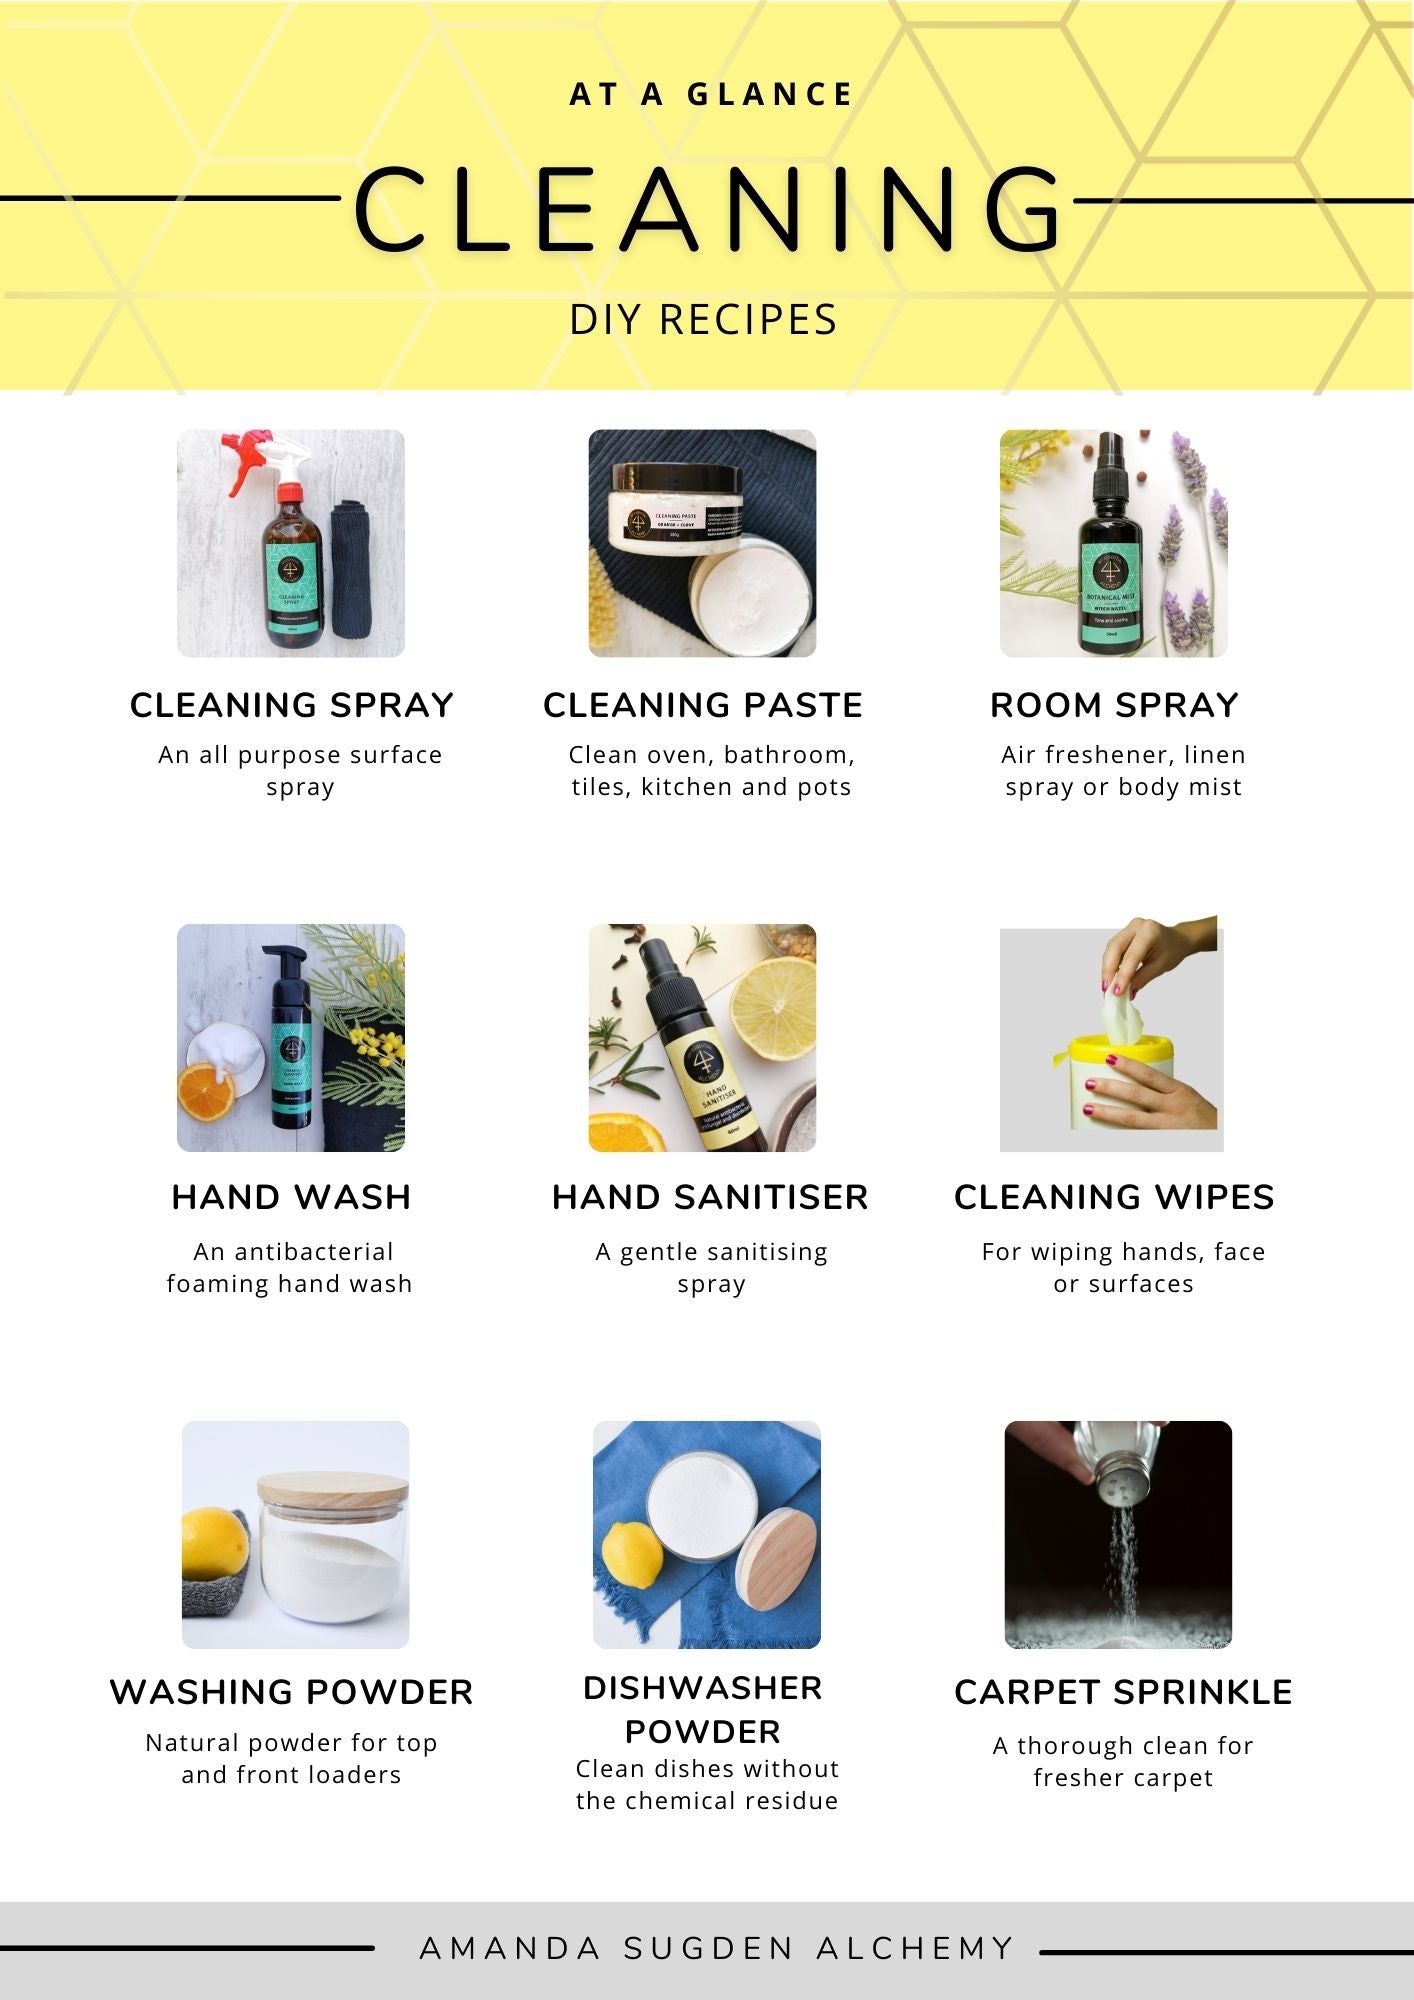 DIY Cleaning: simple recipes for a chemical free home